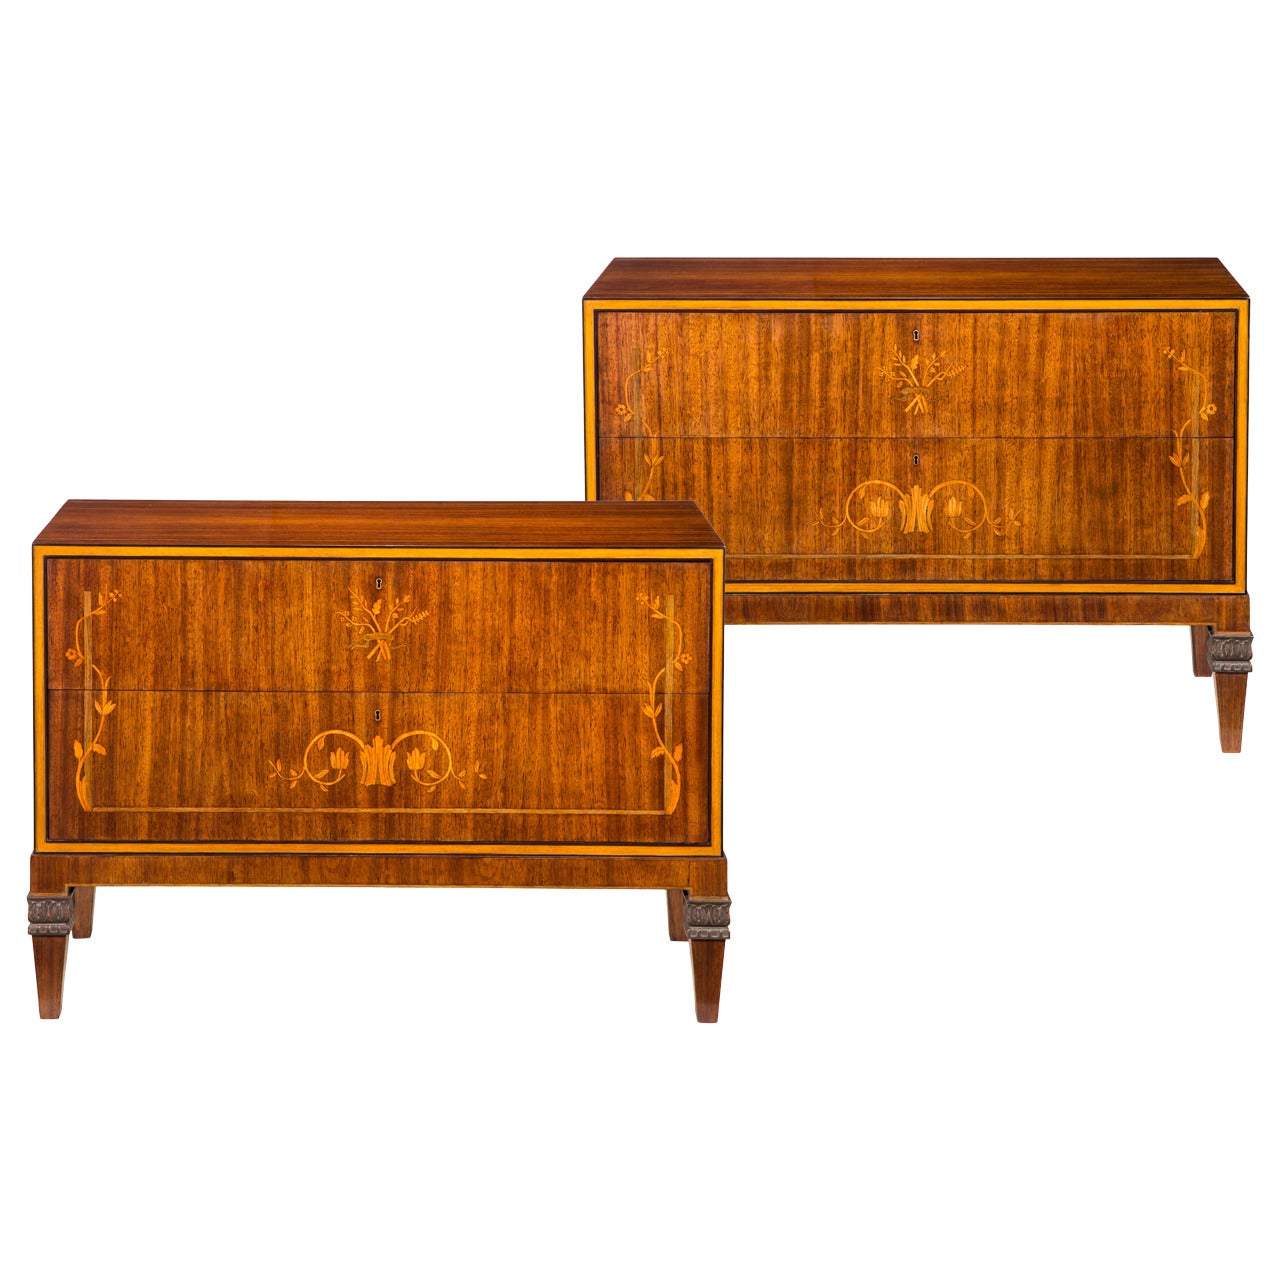 Gustav Bergstrom, A Pair of Swedish Kingwood and Marquetry Commodes